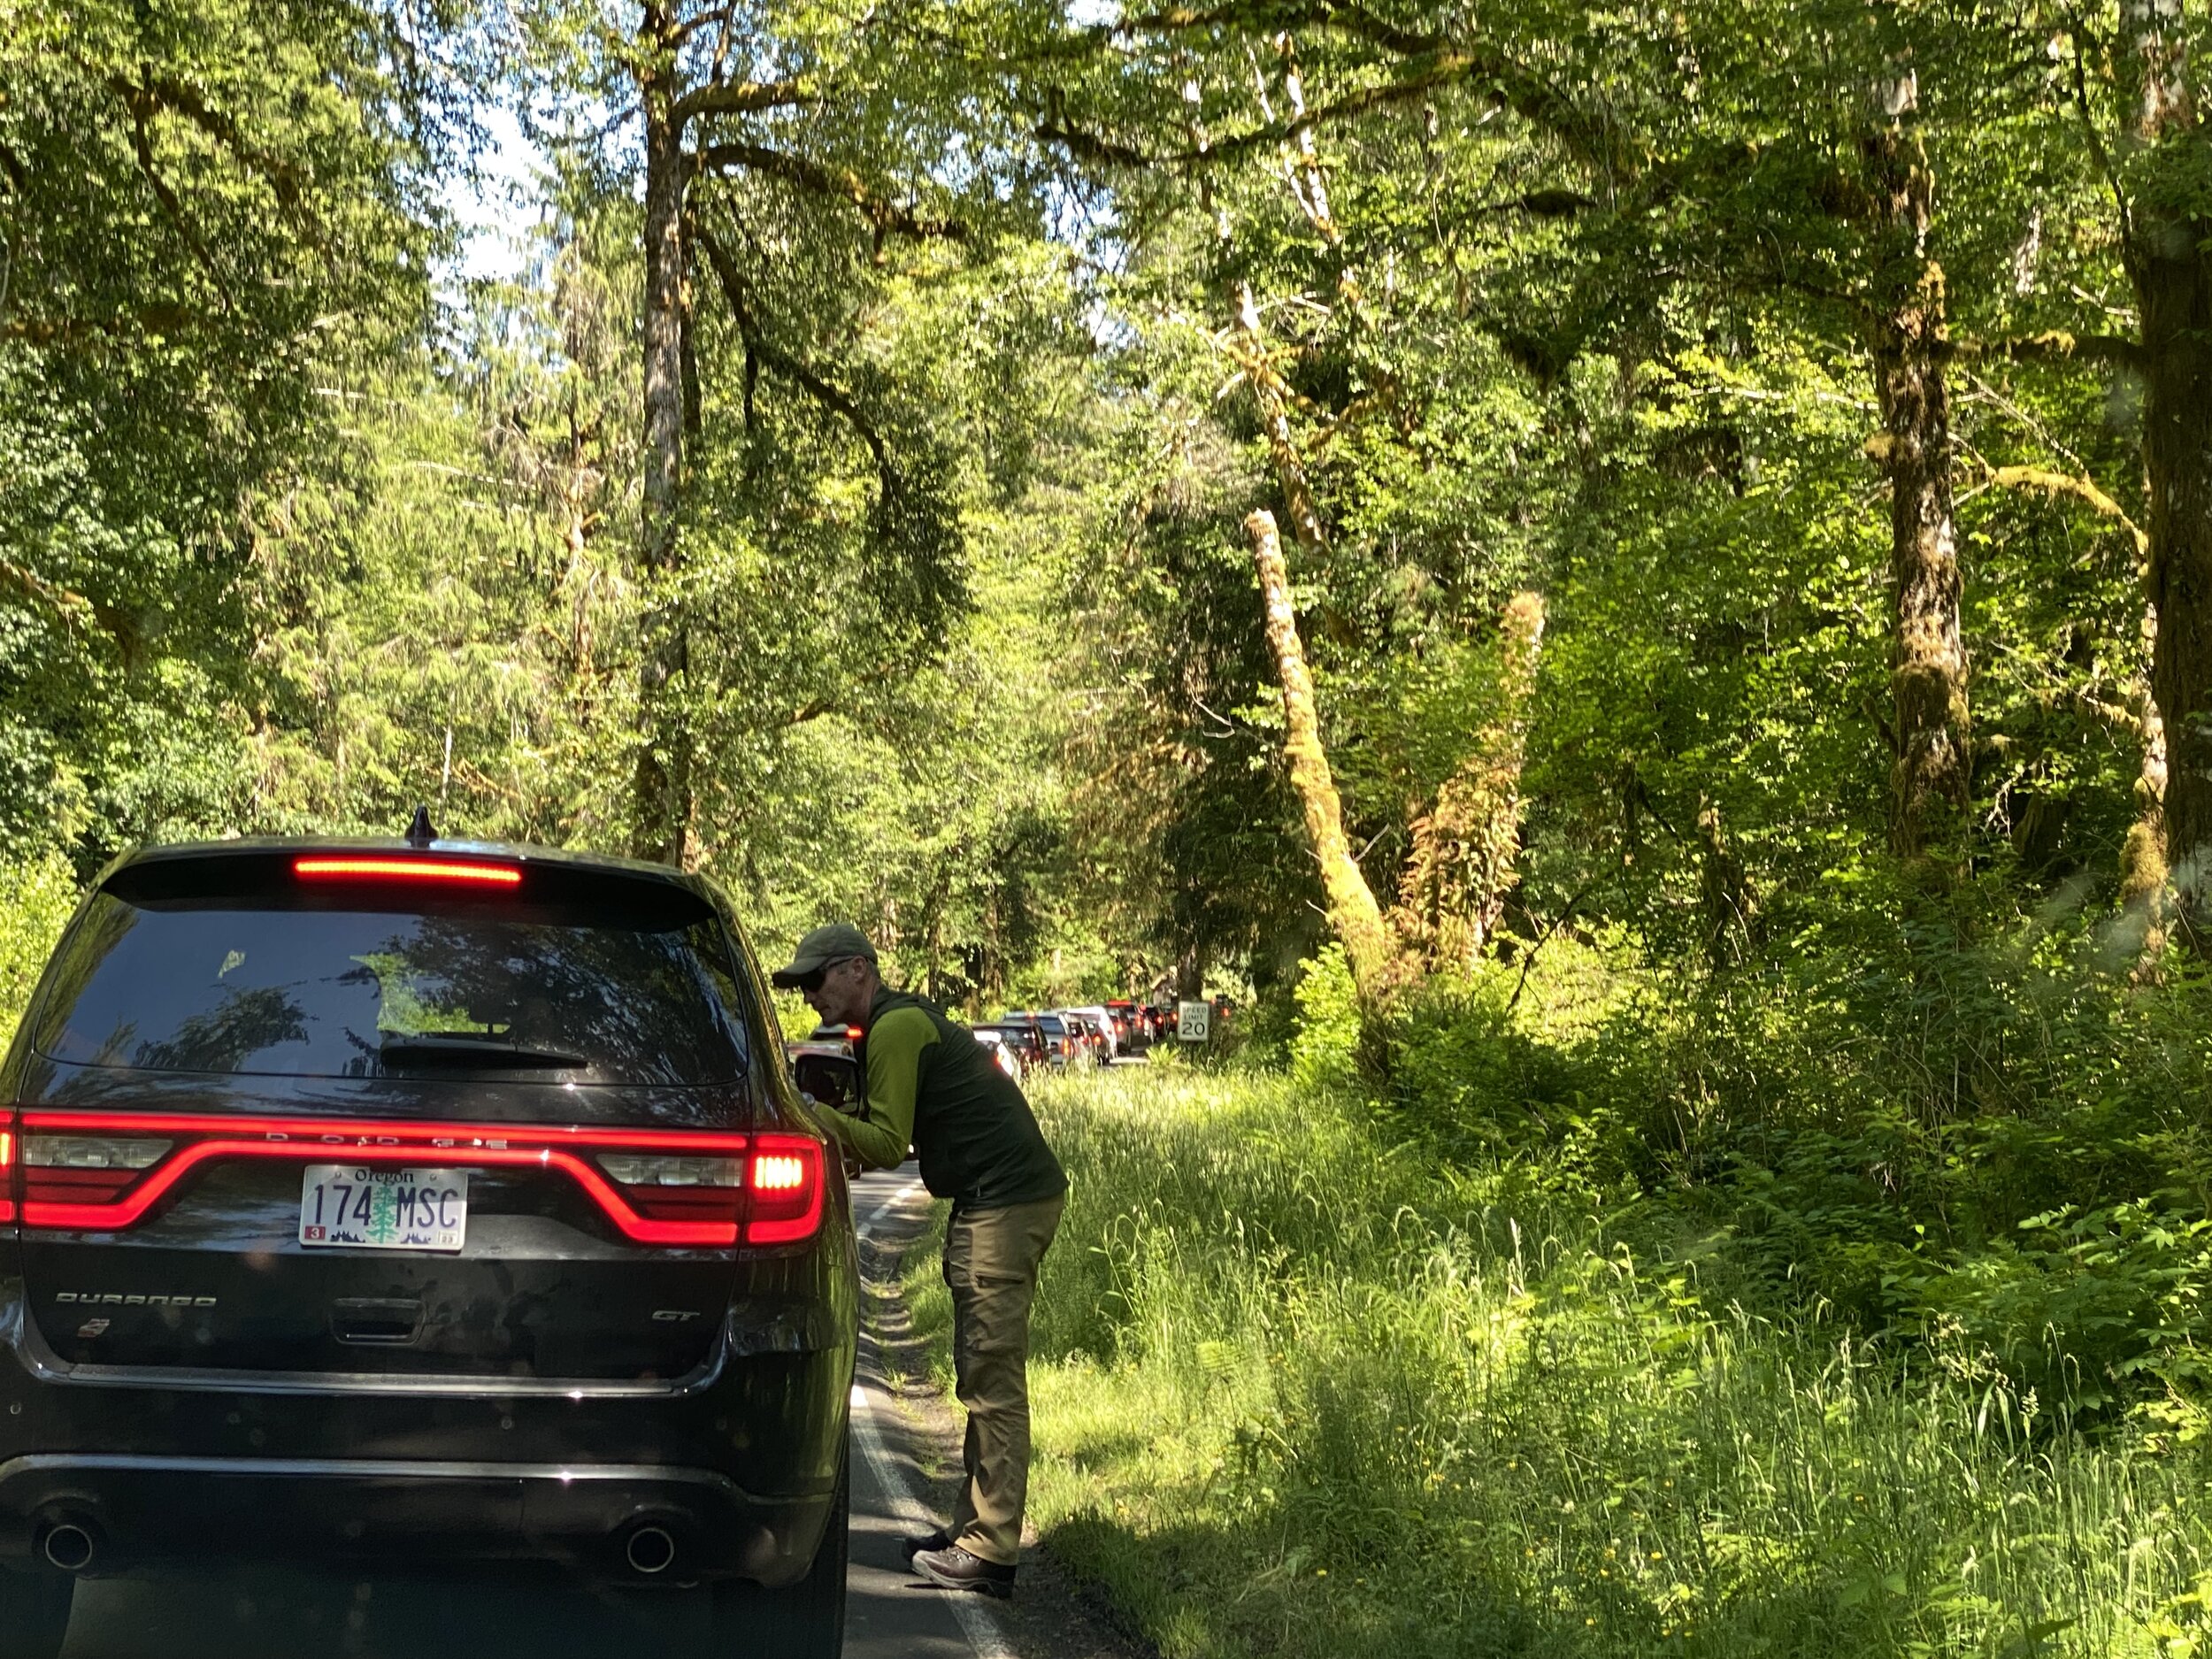 The line into the Hoh Rainforest once full and controlling one car in for one car out.  Photo by Karen Boudreaux, June 17, 2021